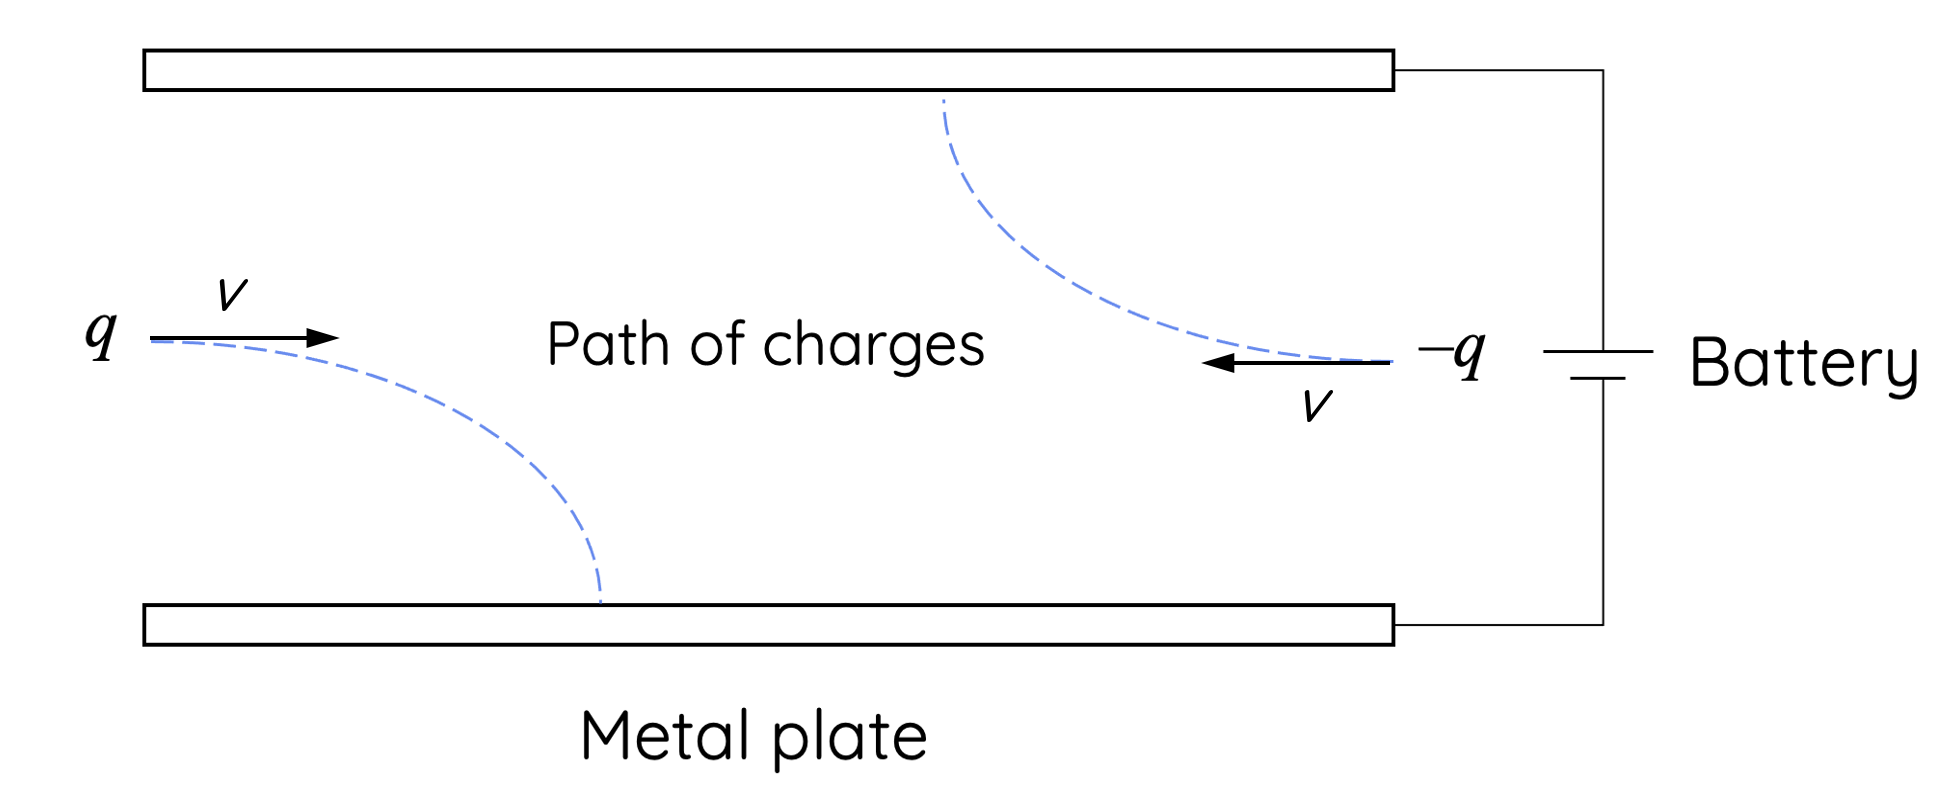 Parabolic motion of charges in electric fields